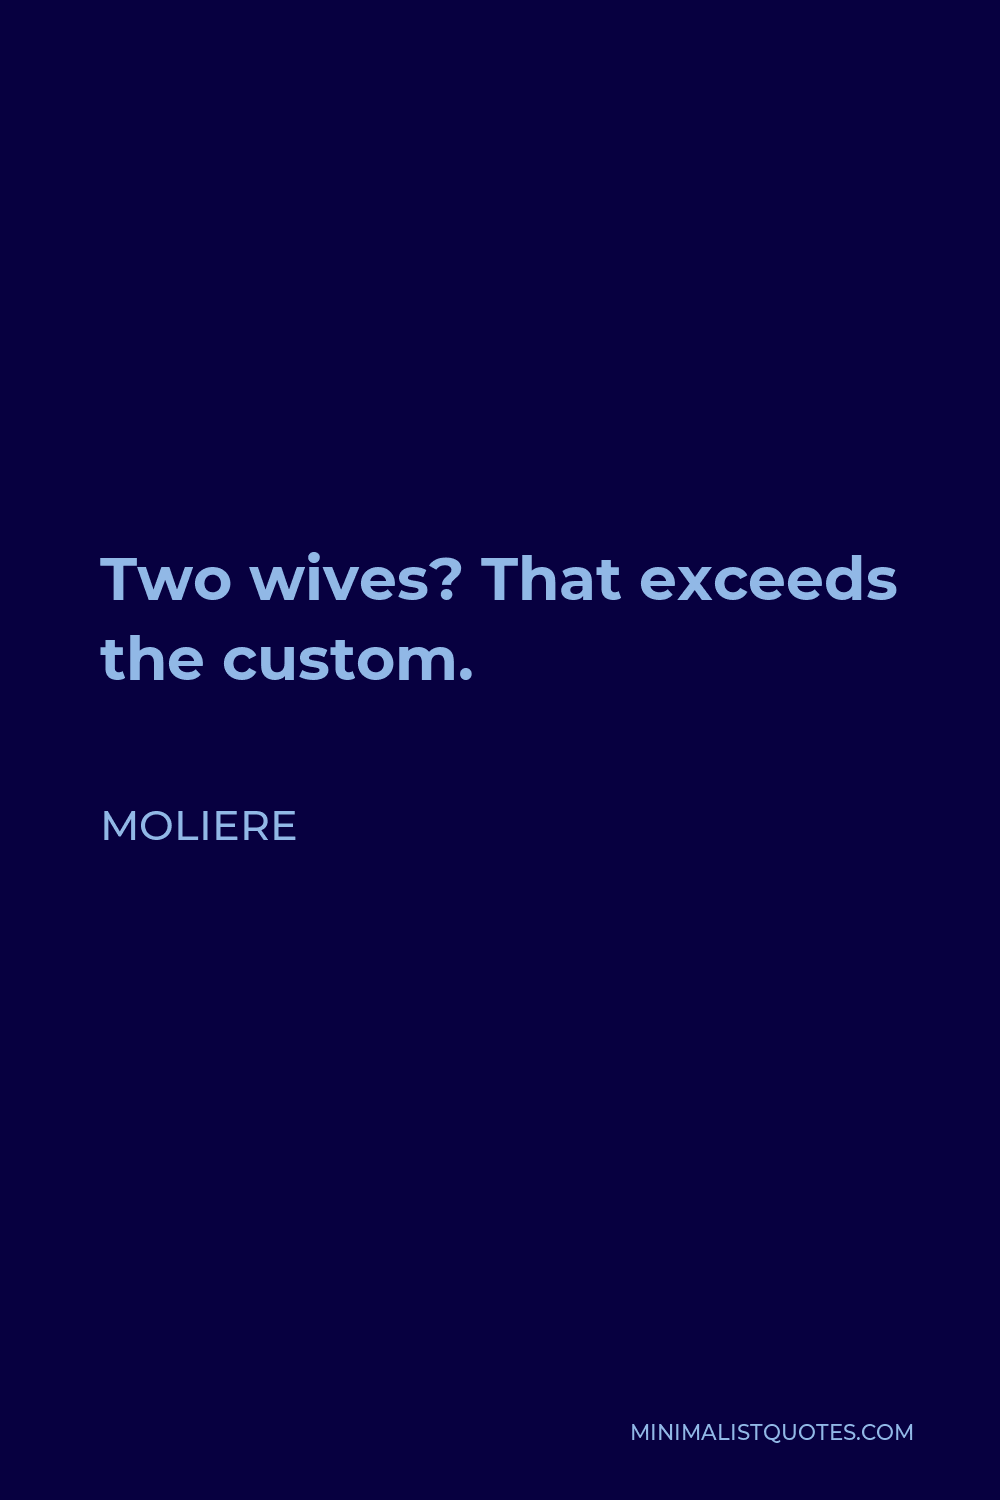 Moliere Quote - Two wives? That exceeds the custom.